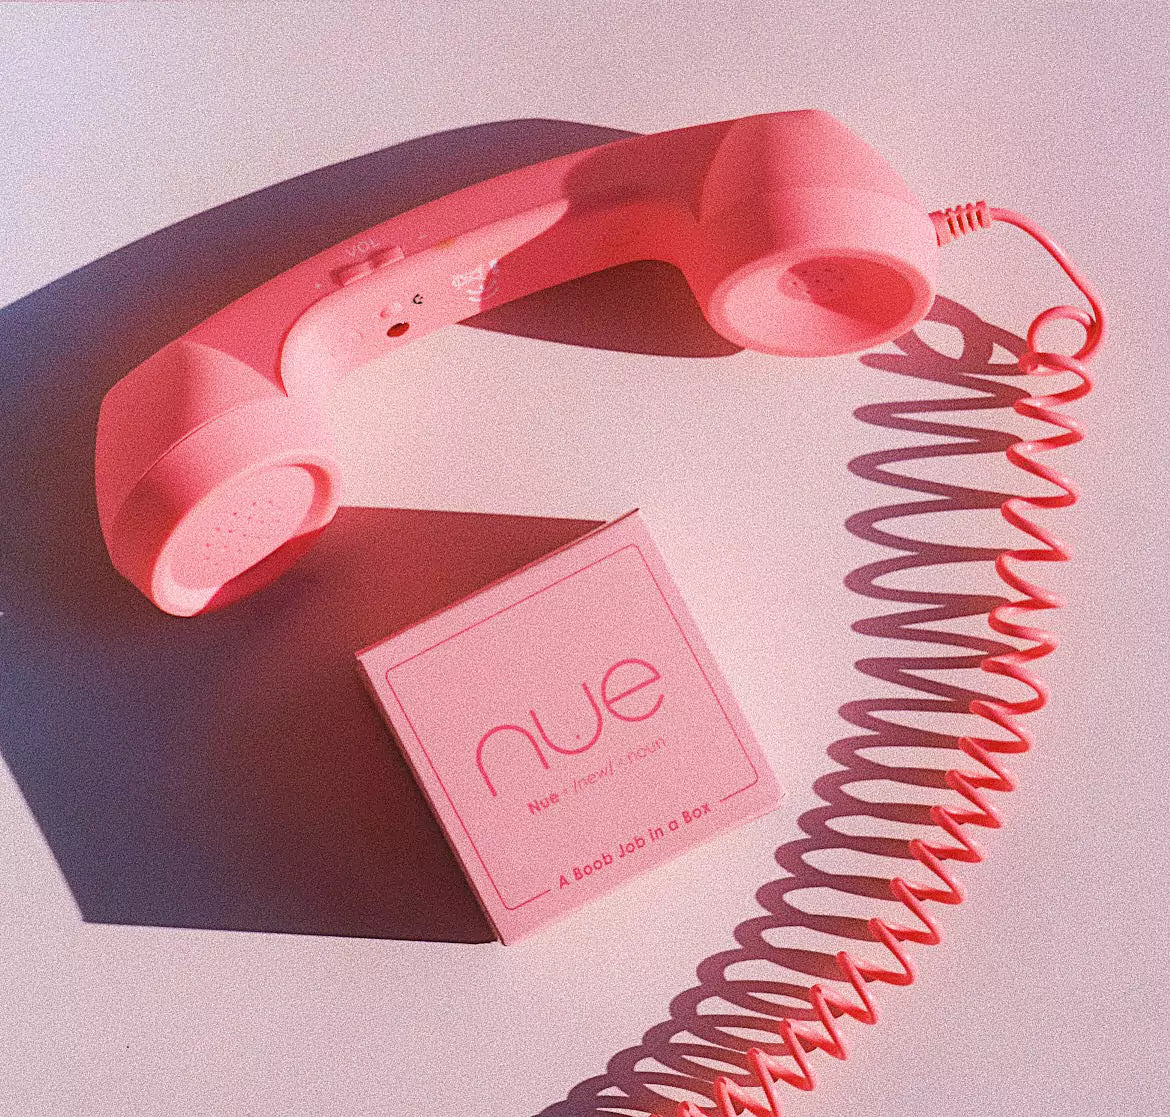 Nue Boob Tape Call for Breast Cancer Awareness